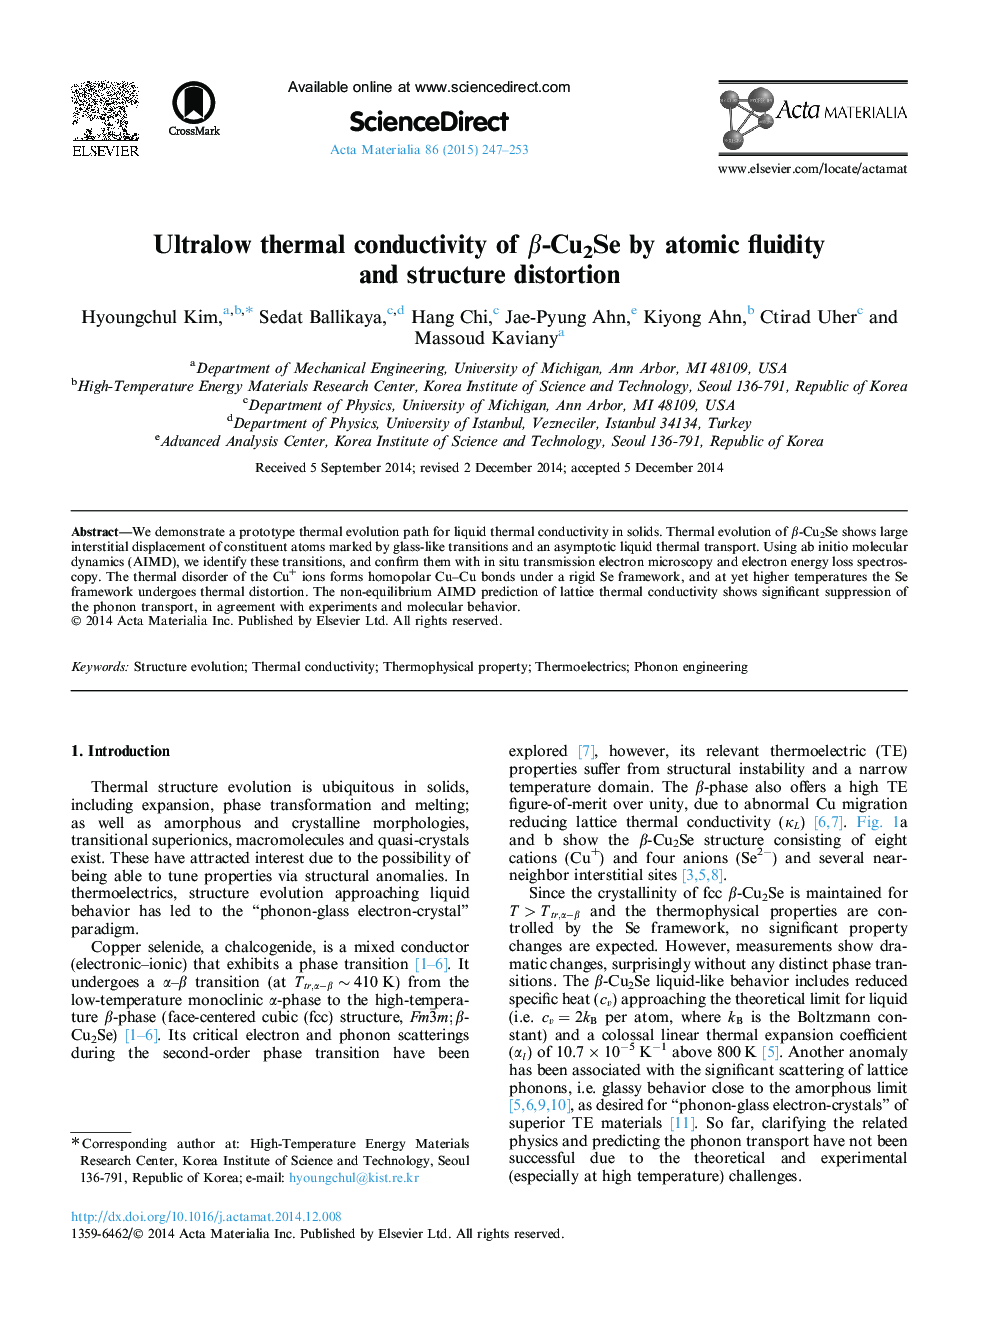 Ultralow thermal conductivity of Î²-Cu2Se by atomic fluidity and structure distortion